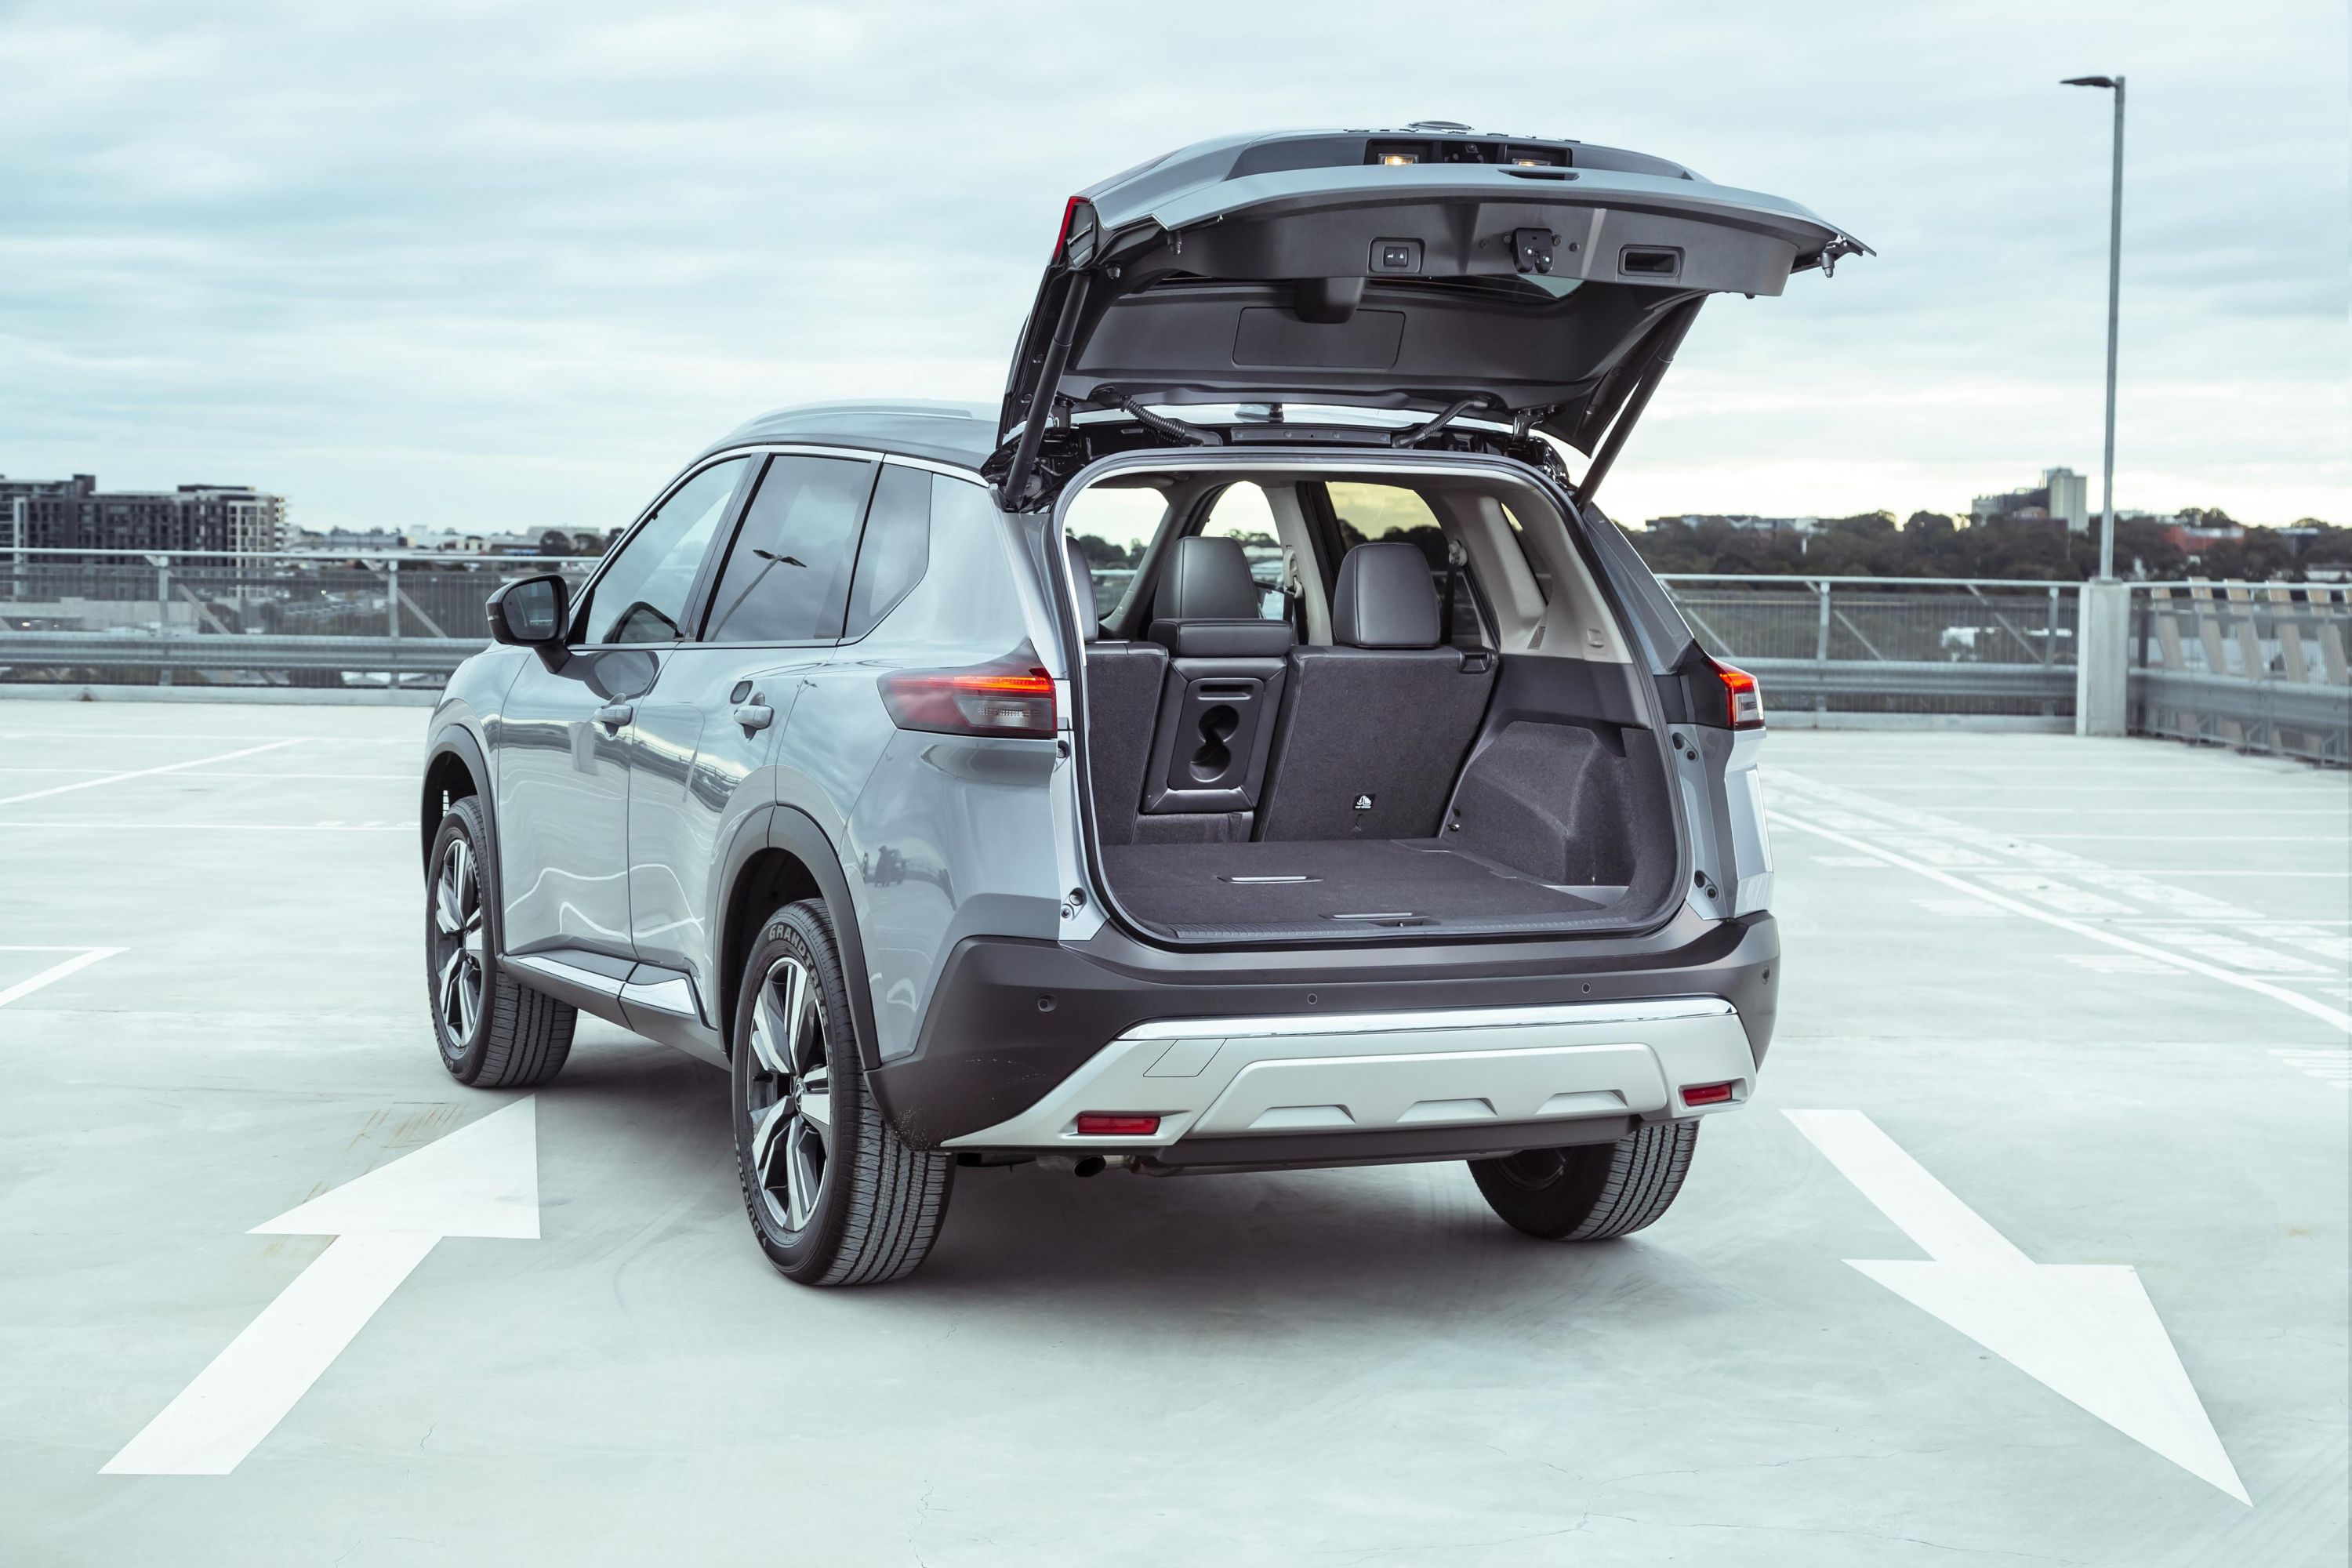 Nissan Qashqai Boot Space, Size, Luggage Capacity & Cargo Volume